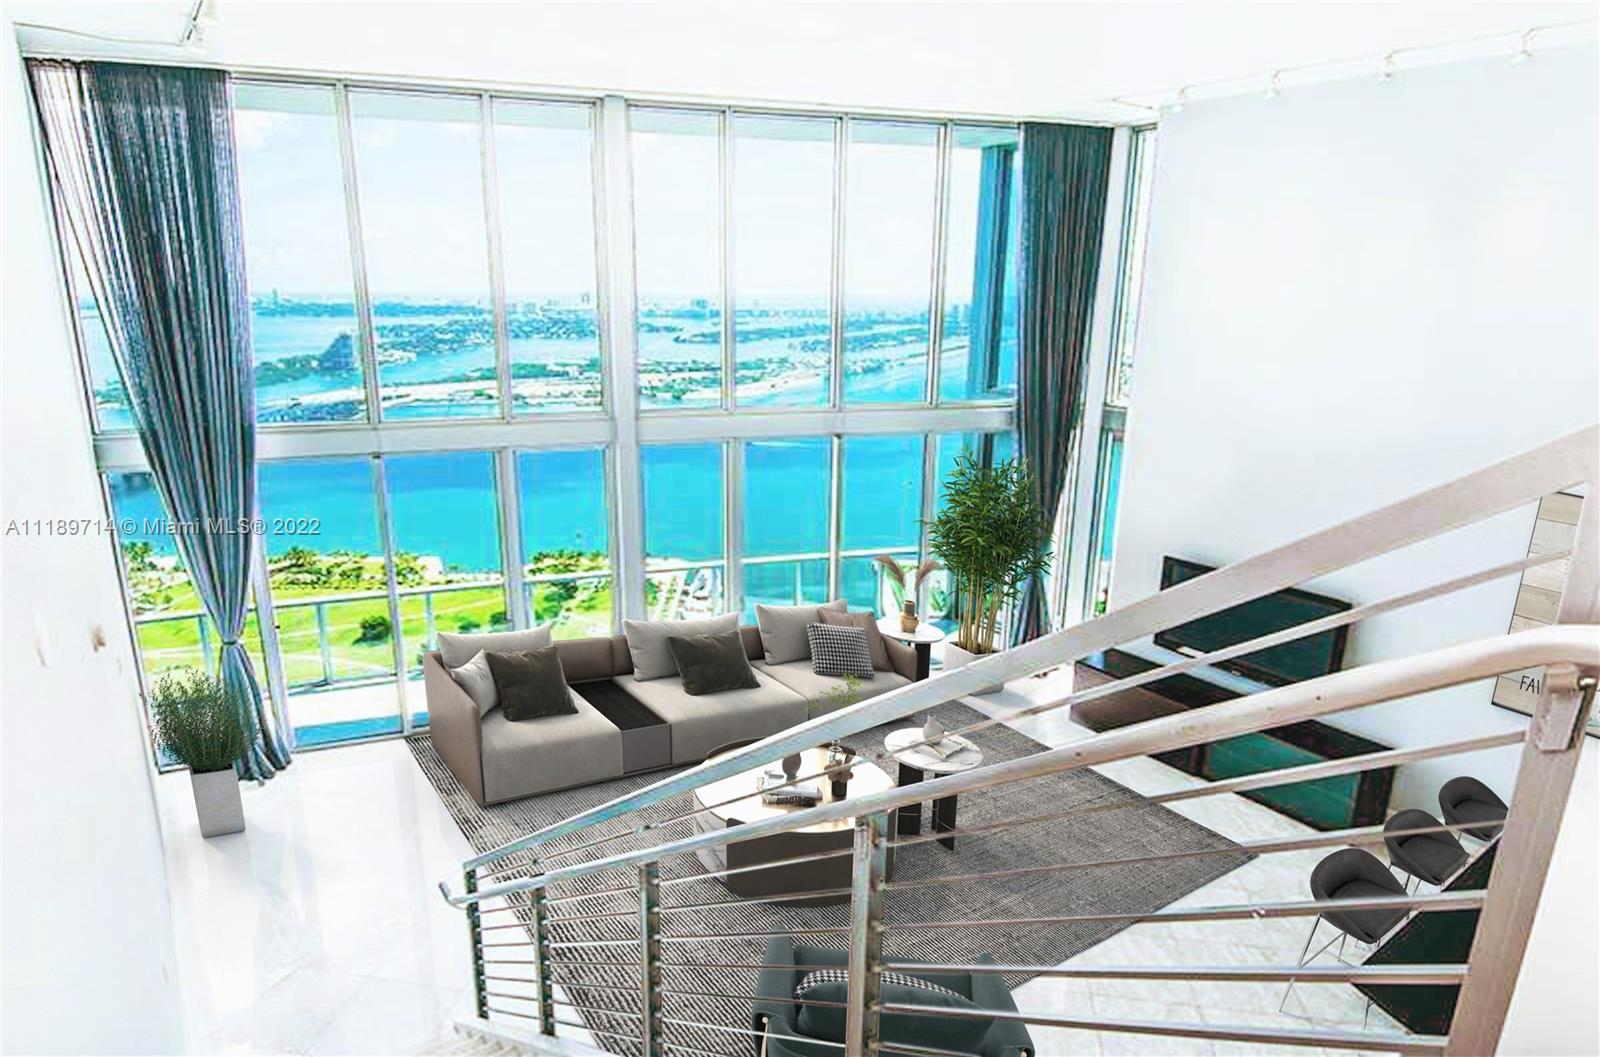 BEST deal for a Penthouse in all of Downtown / Brickell. Check comps! Floor-to-ceiling 20’ windows p